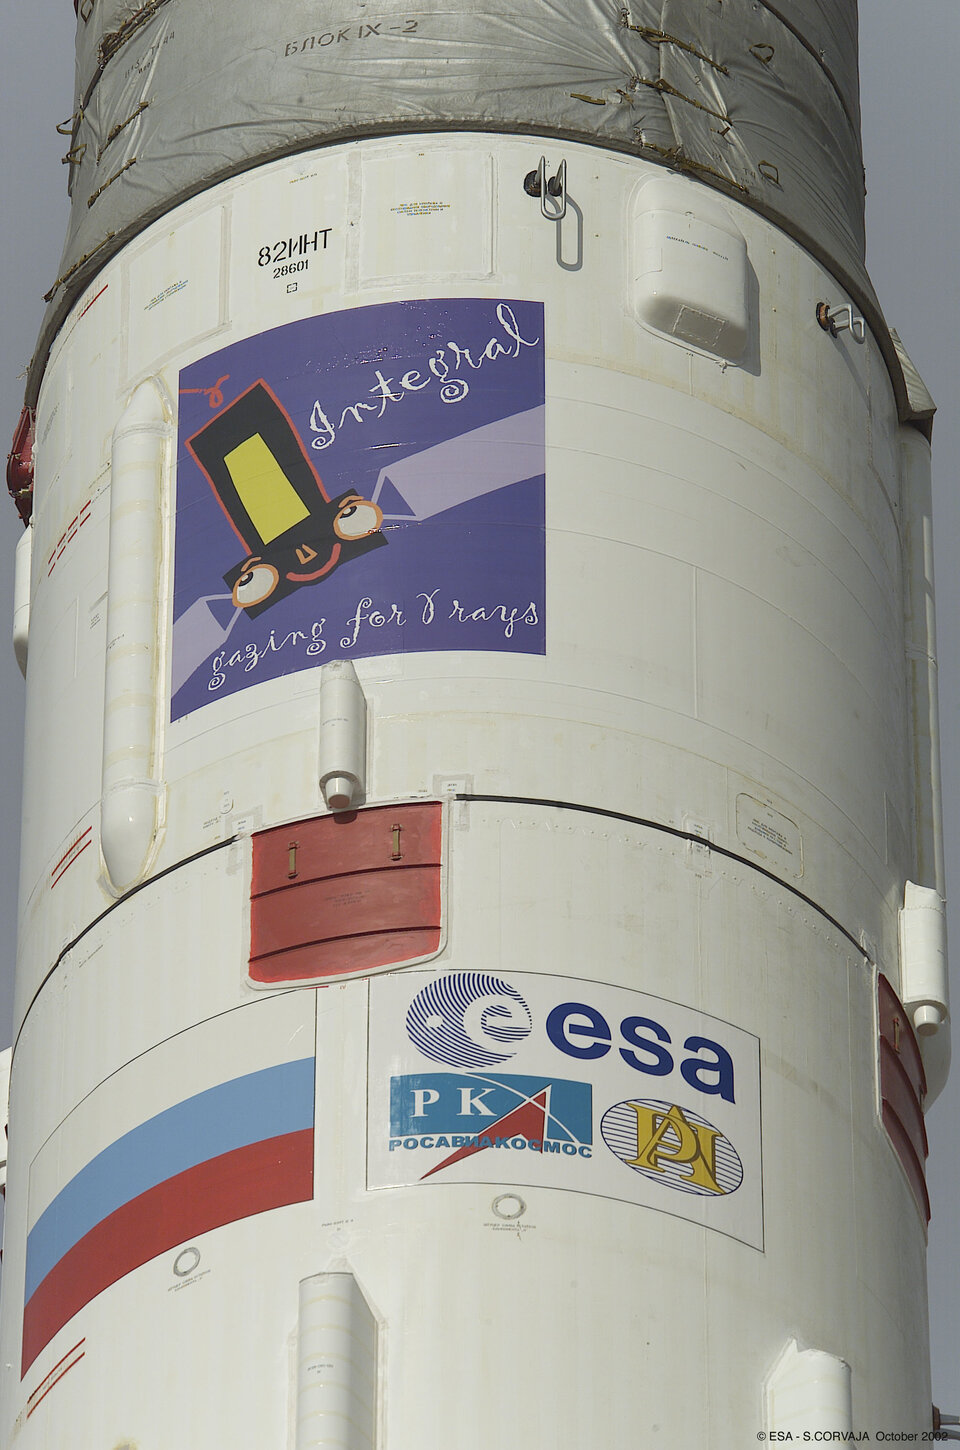 The Integral mission logo on the Proton launcher